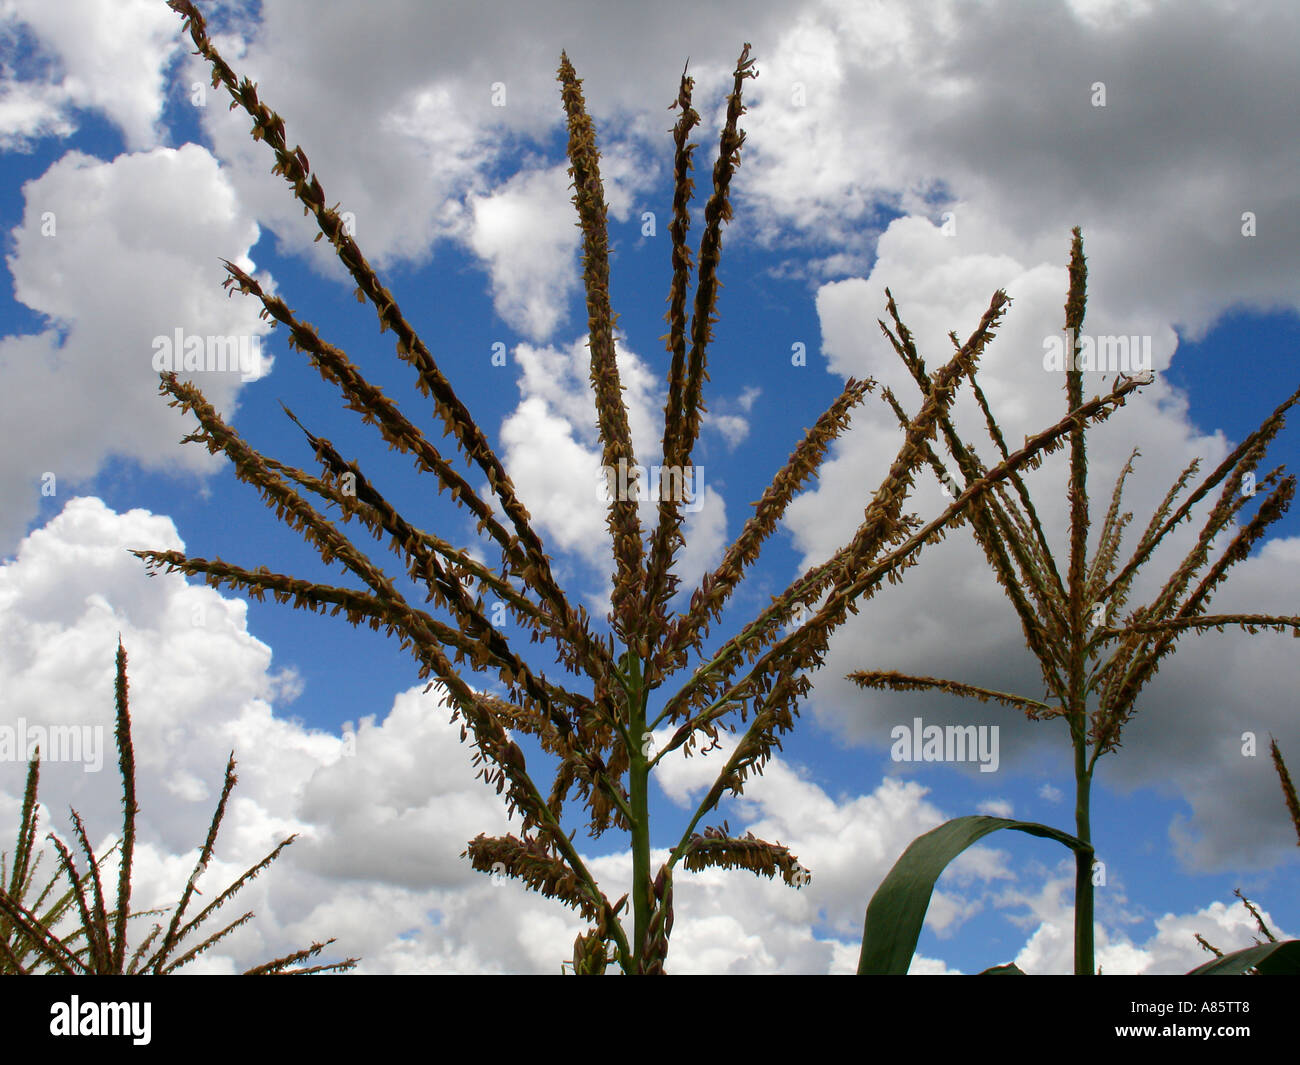 Corn (maize) plant tassels with pollen and green leaves against blue sky in a farm field in Copperbelt region of Zambia in Southern Africa Stock Photo